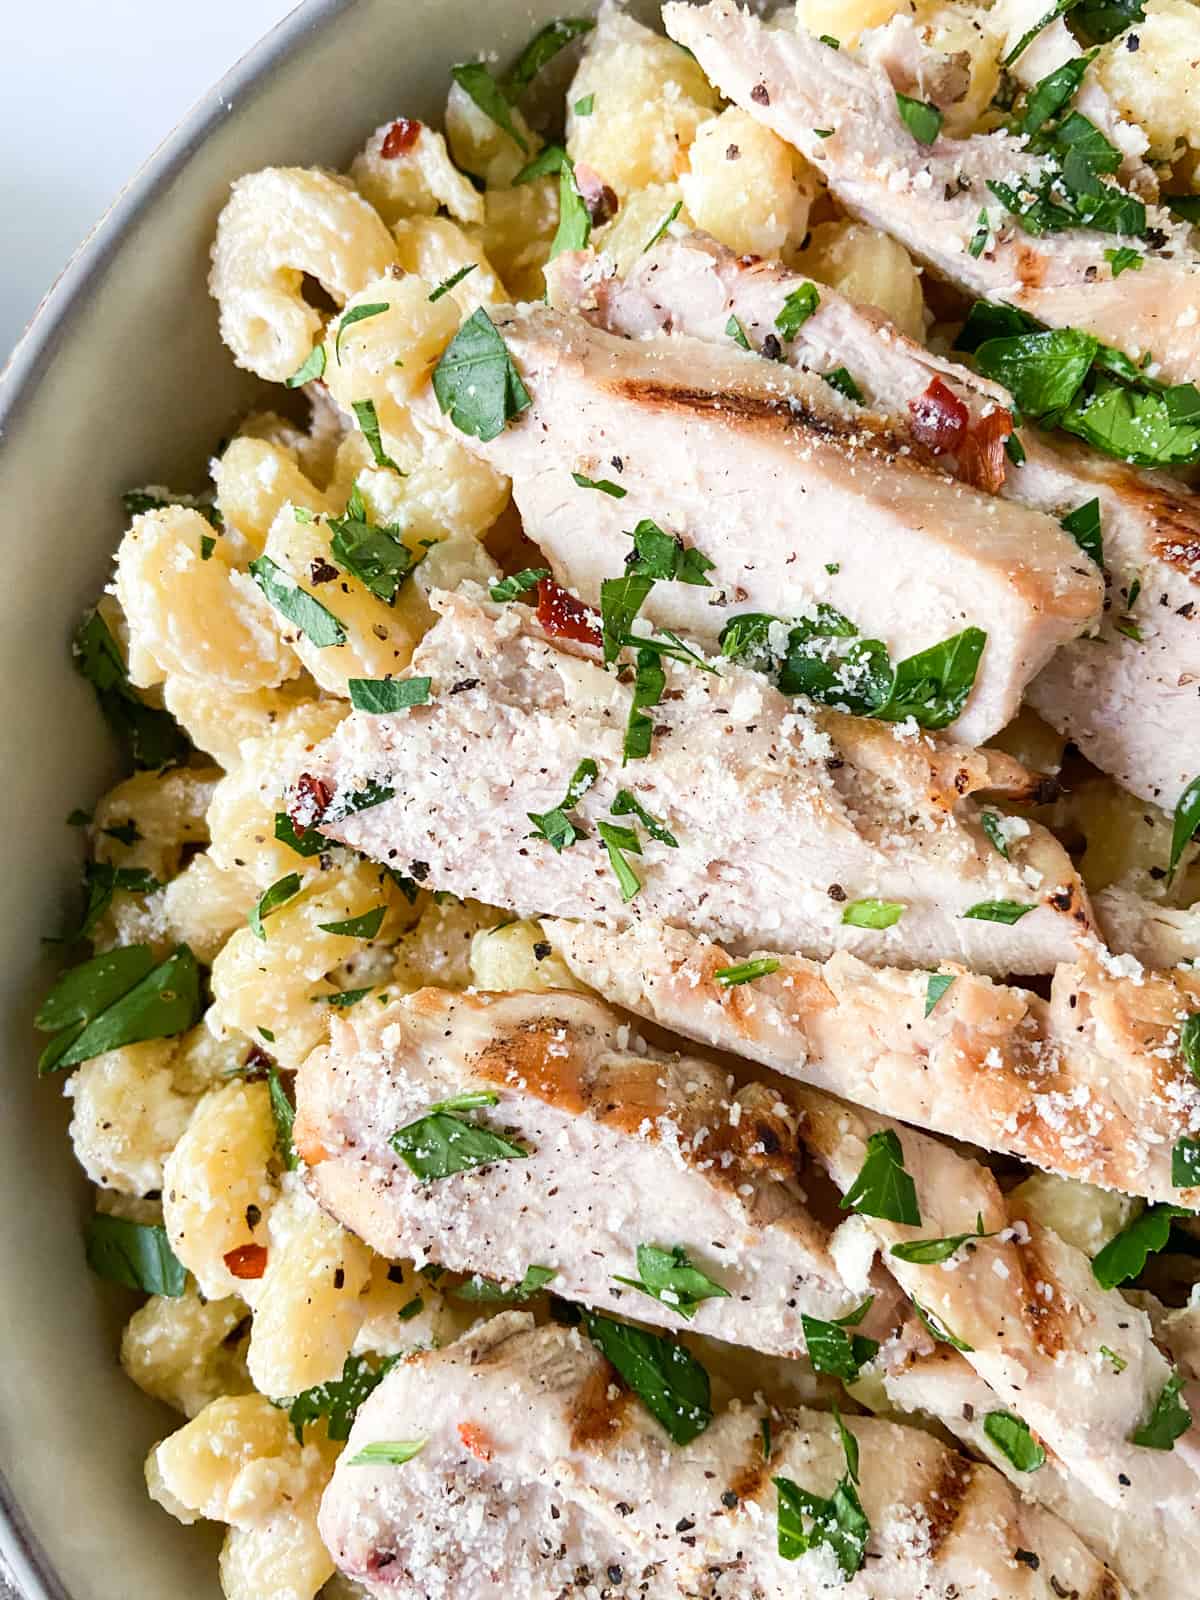 A bowl of feta pasta with chicken.